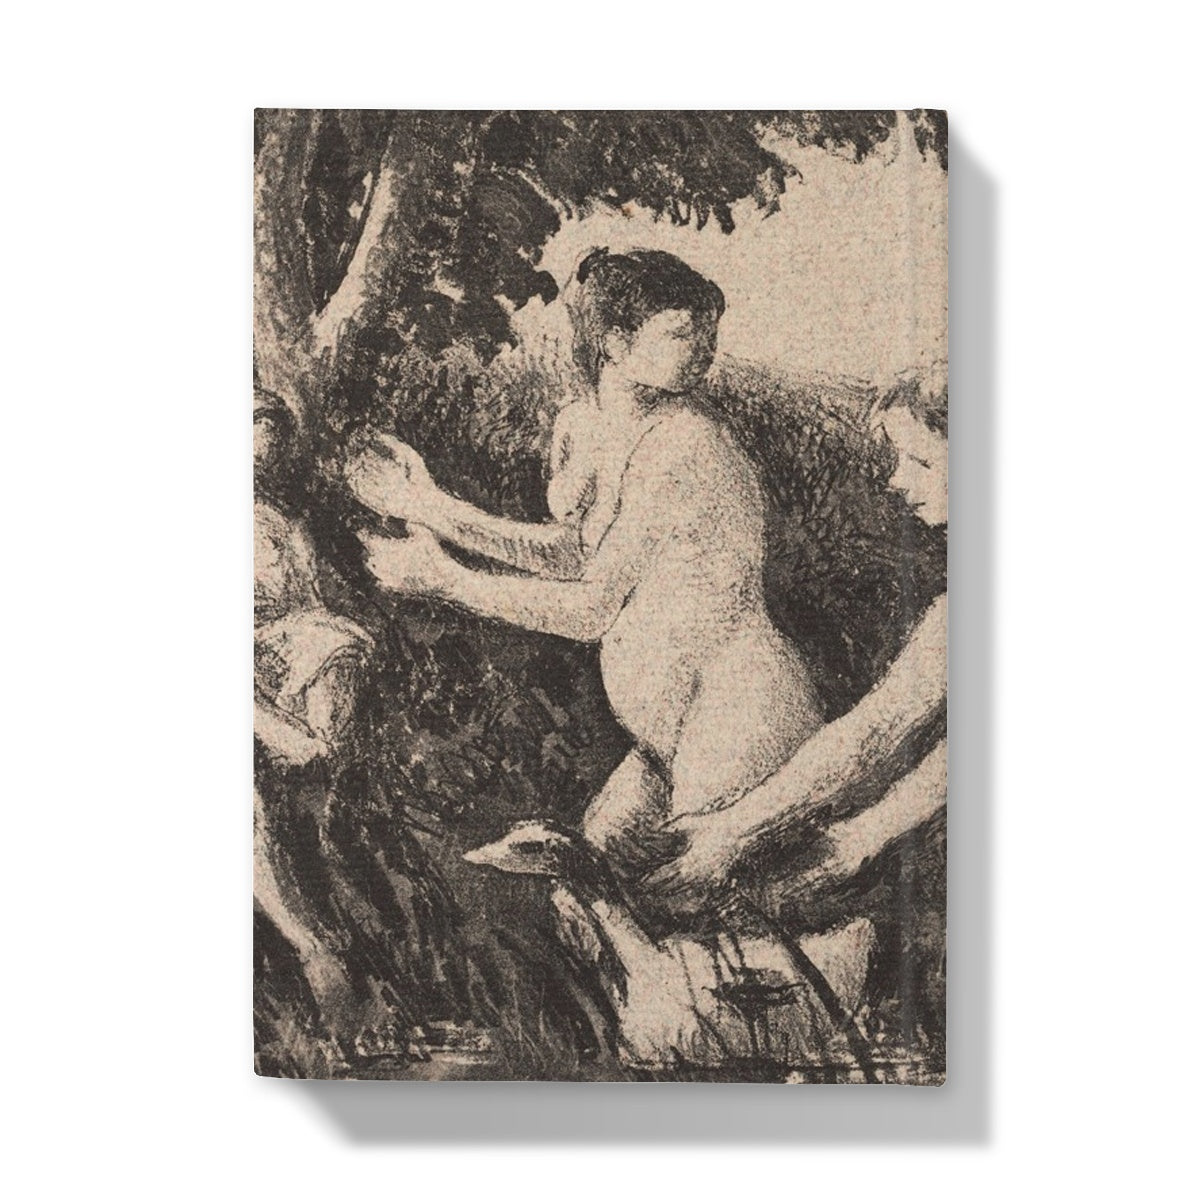 Baigneuses luttant (Bathers Wrestling) by Camille Pissarro, c. 1896 - Hardback Journal